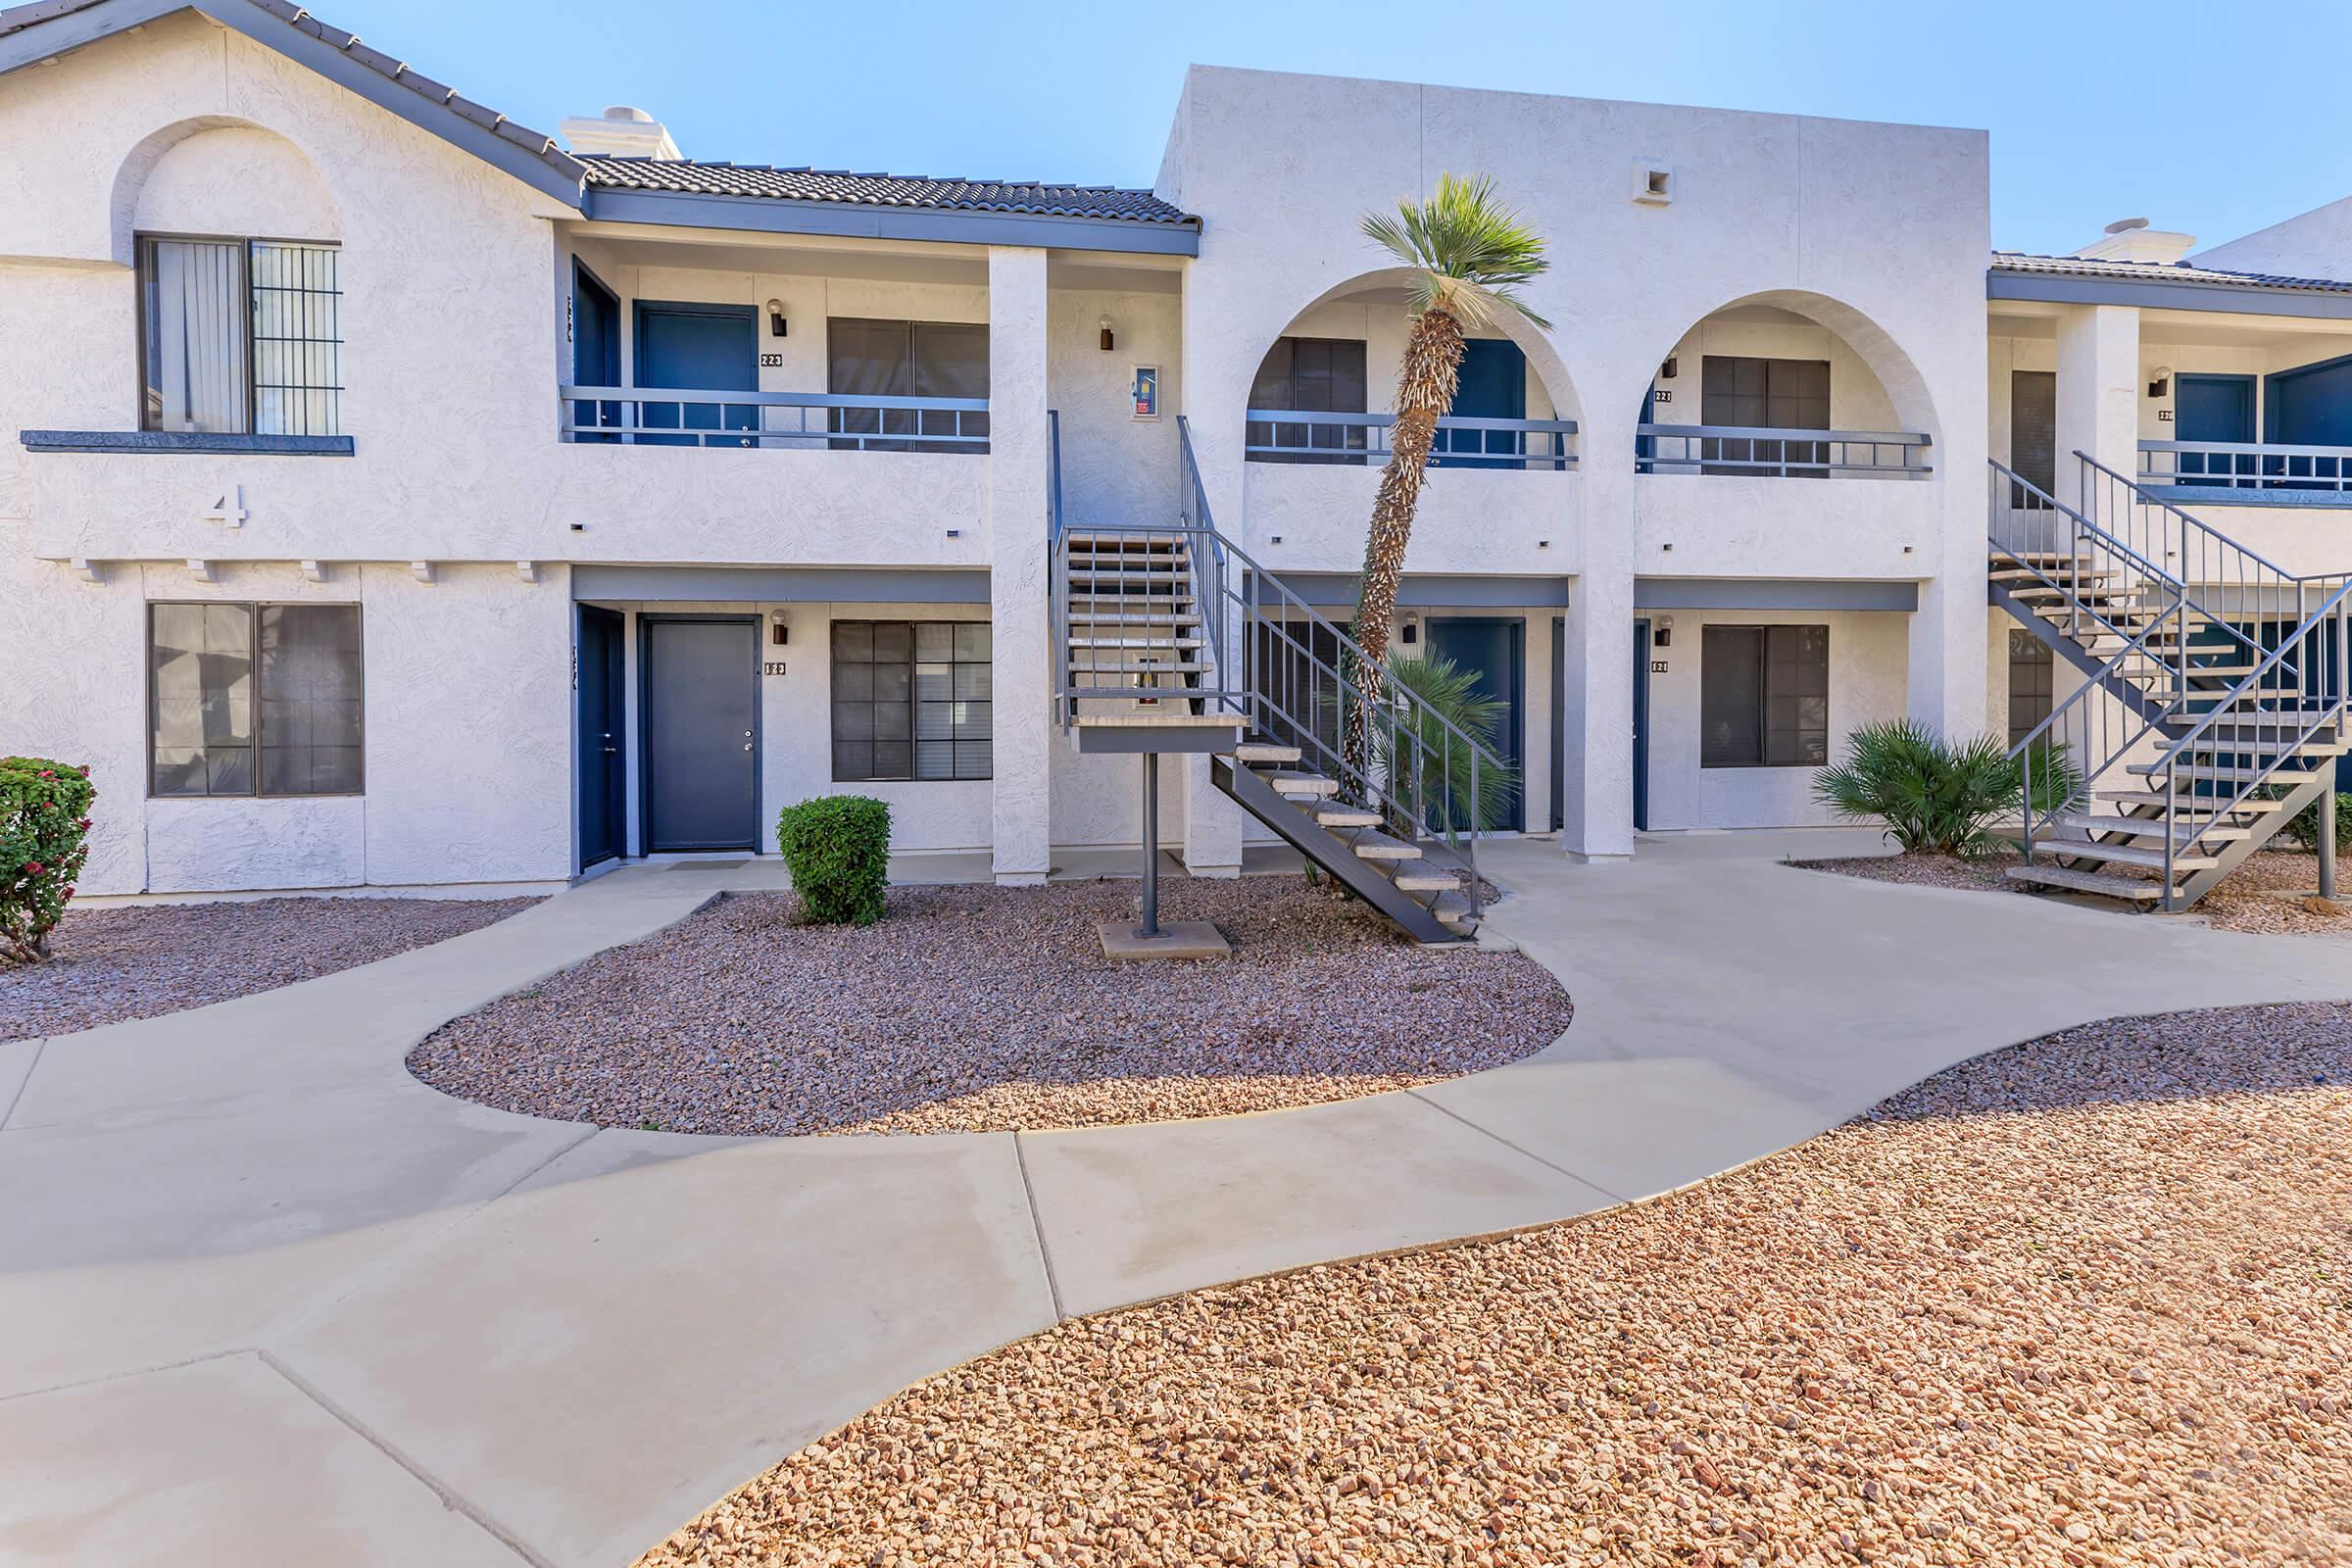 Outdoor front view of a gravel path and Rise on Cactus Phoenix apartments